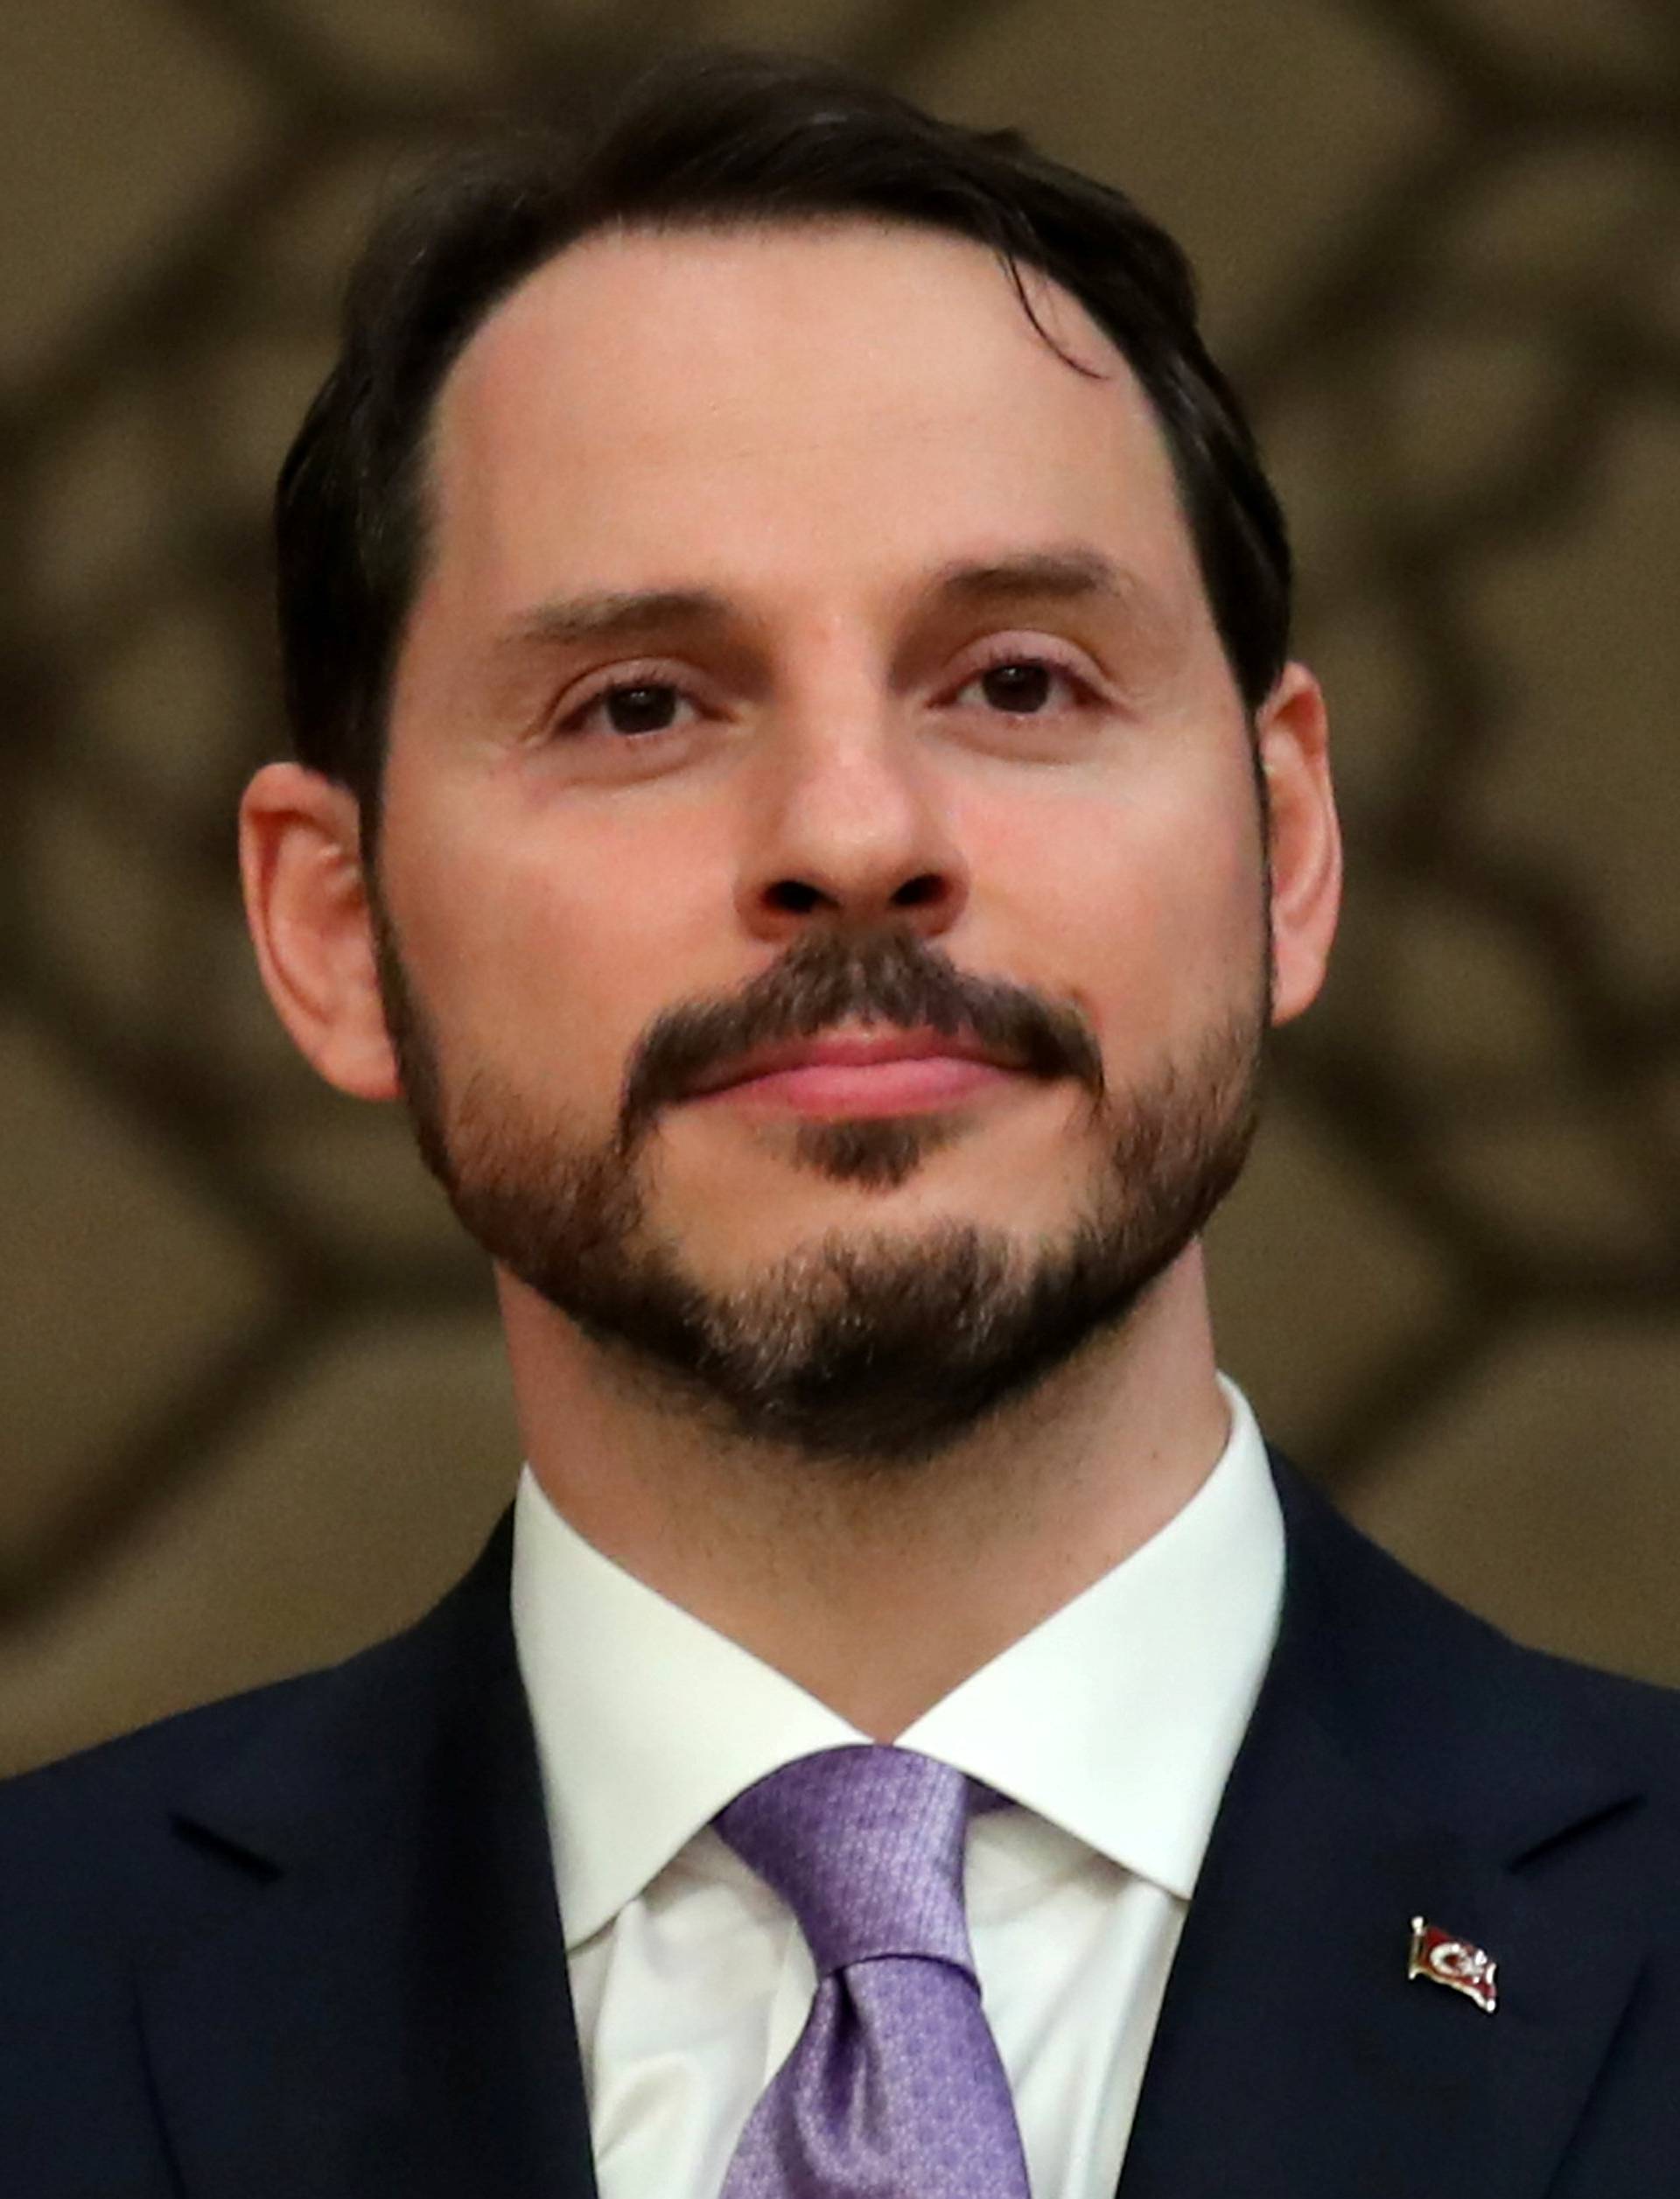 Turkish President Tayyip Erdogan's son-in-law and newly appointed Treasury and Finance Minister Berat Albayrak attends a presser at the Presidential Palace in Ankara